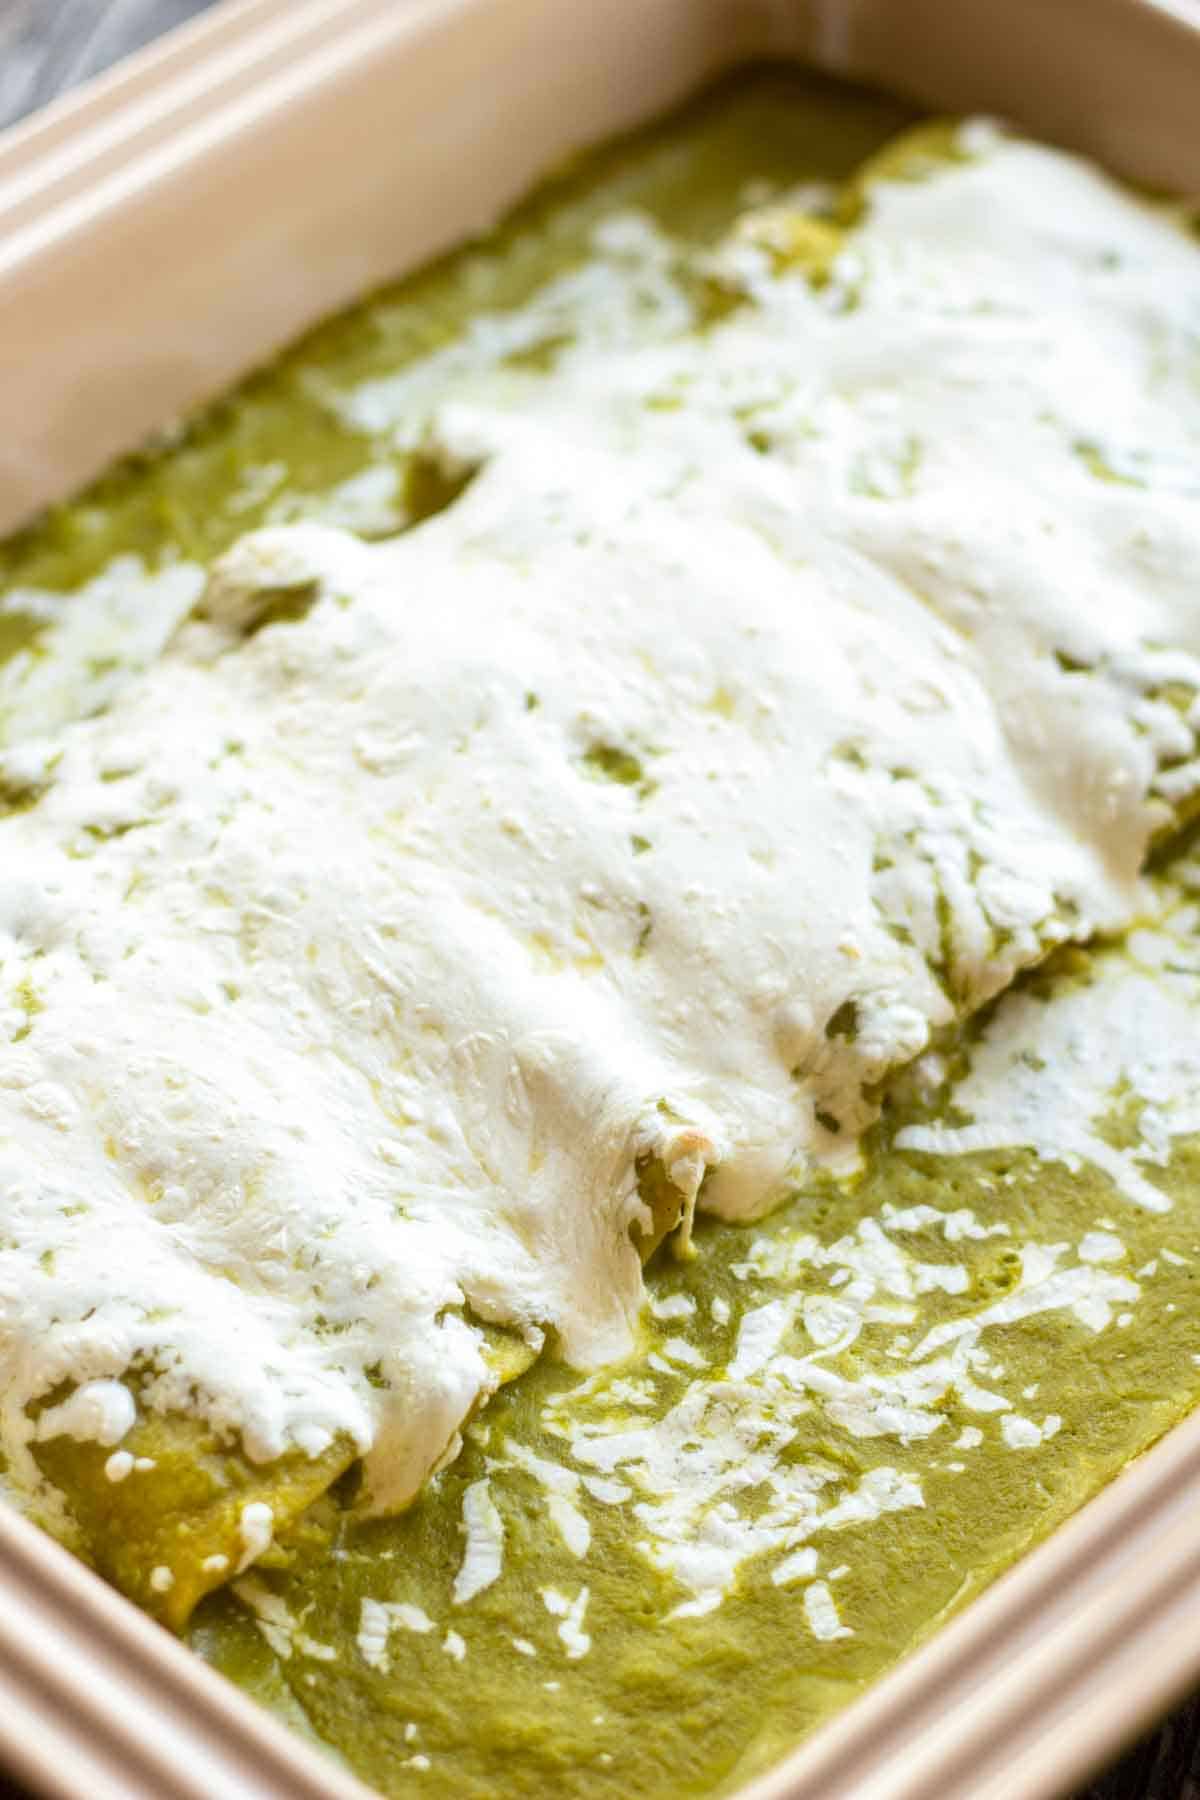 Close up of a tray of enchiladas Suizas verdes with melted cheese on top.